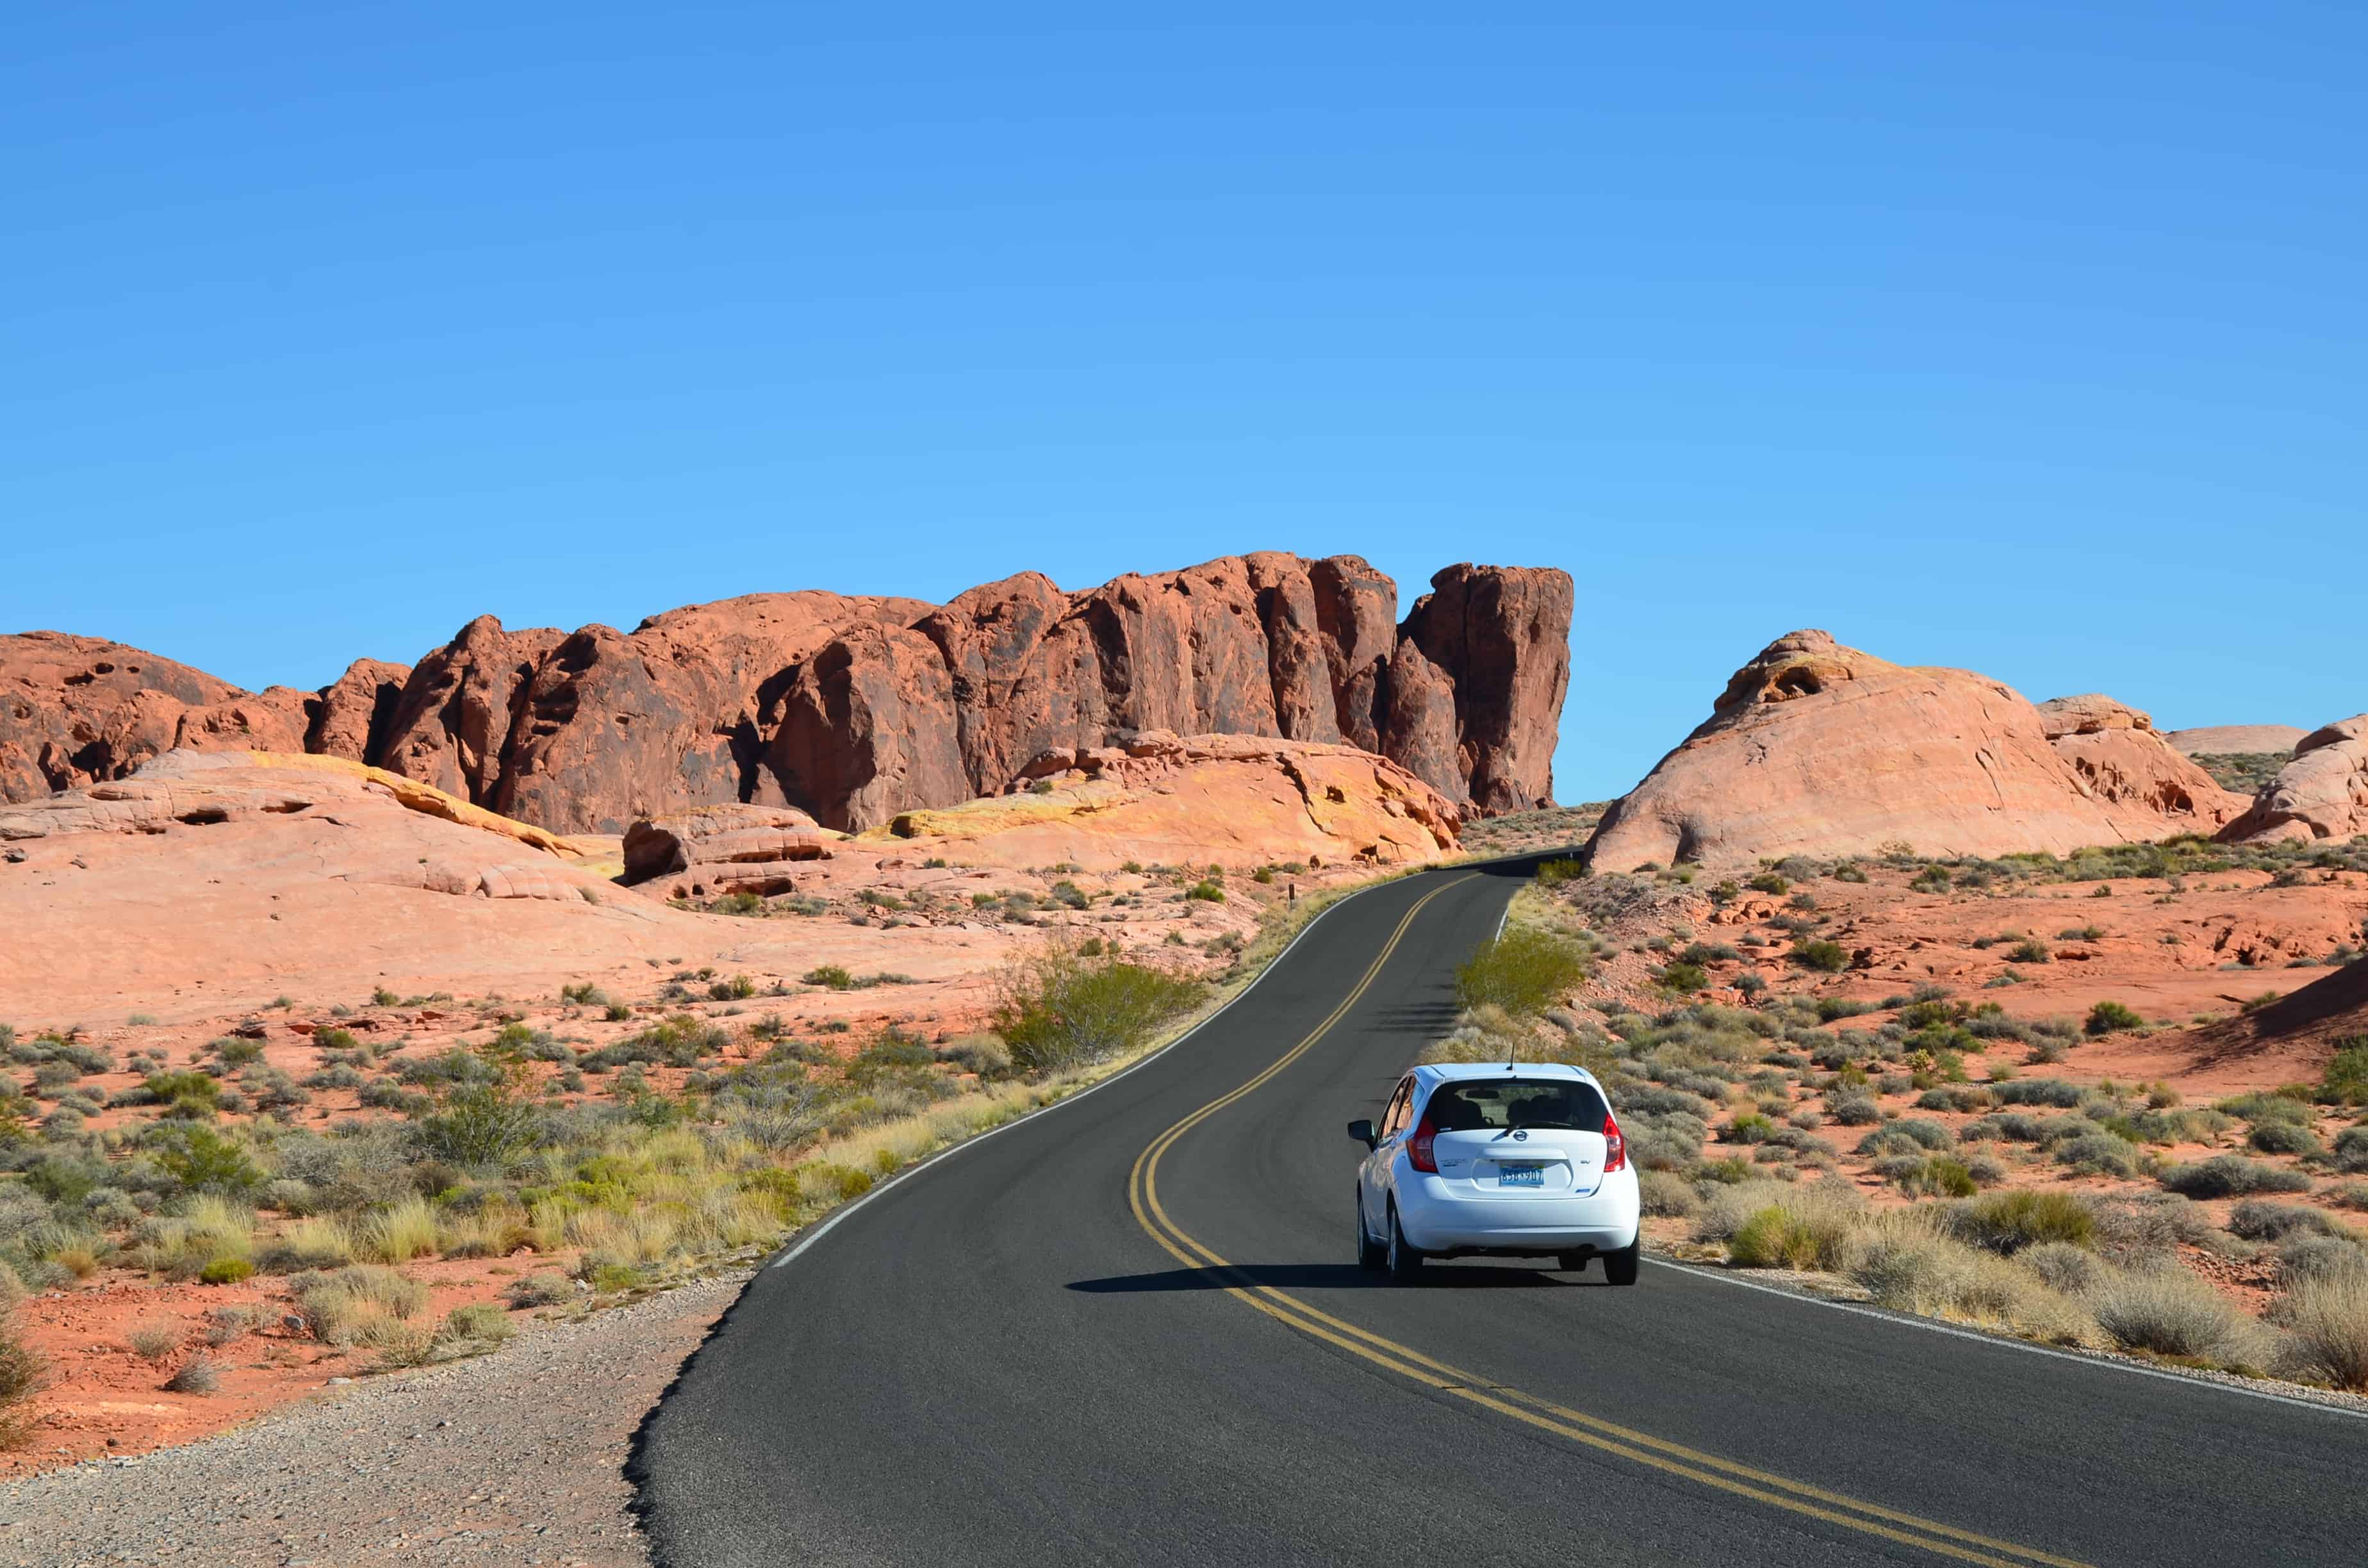 White Domes Road at Valley of Fire State Park in Nevada